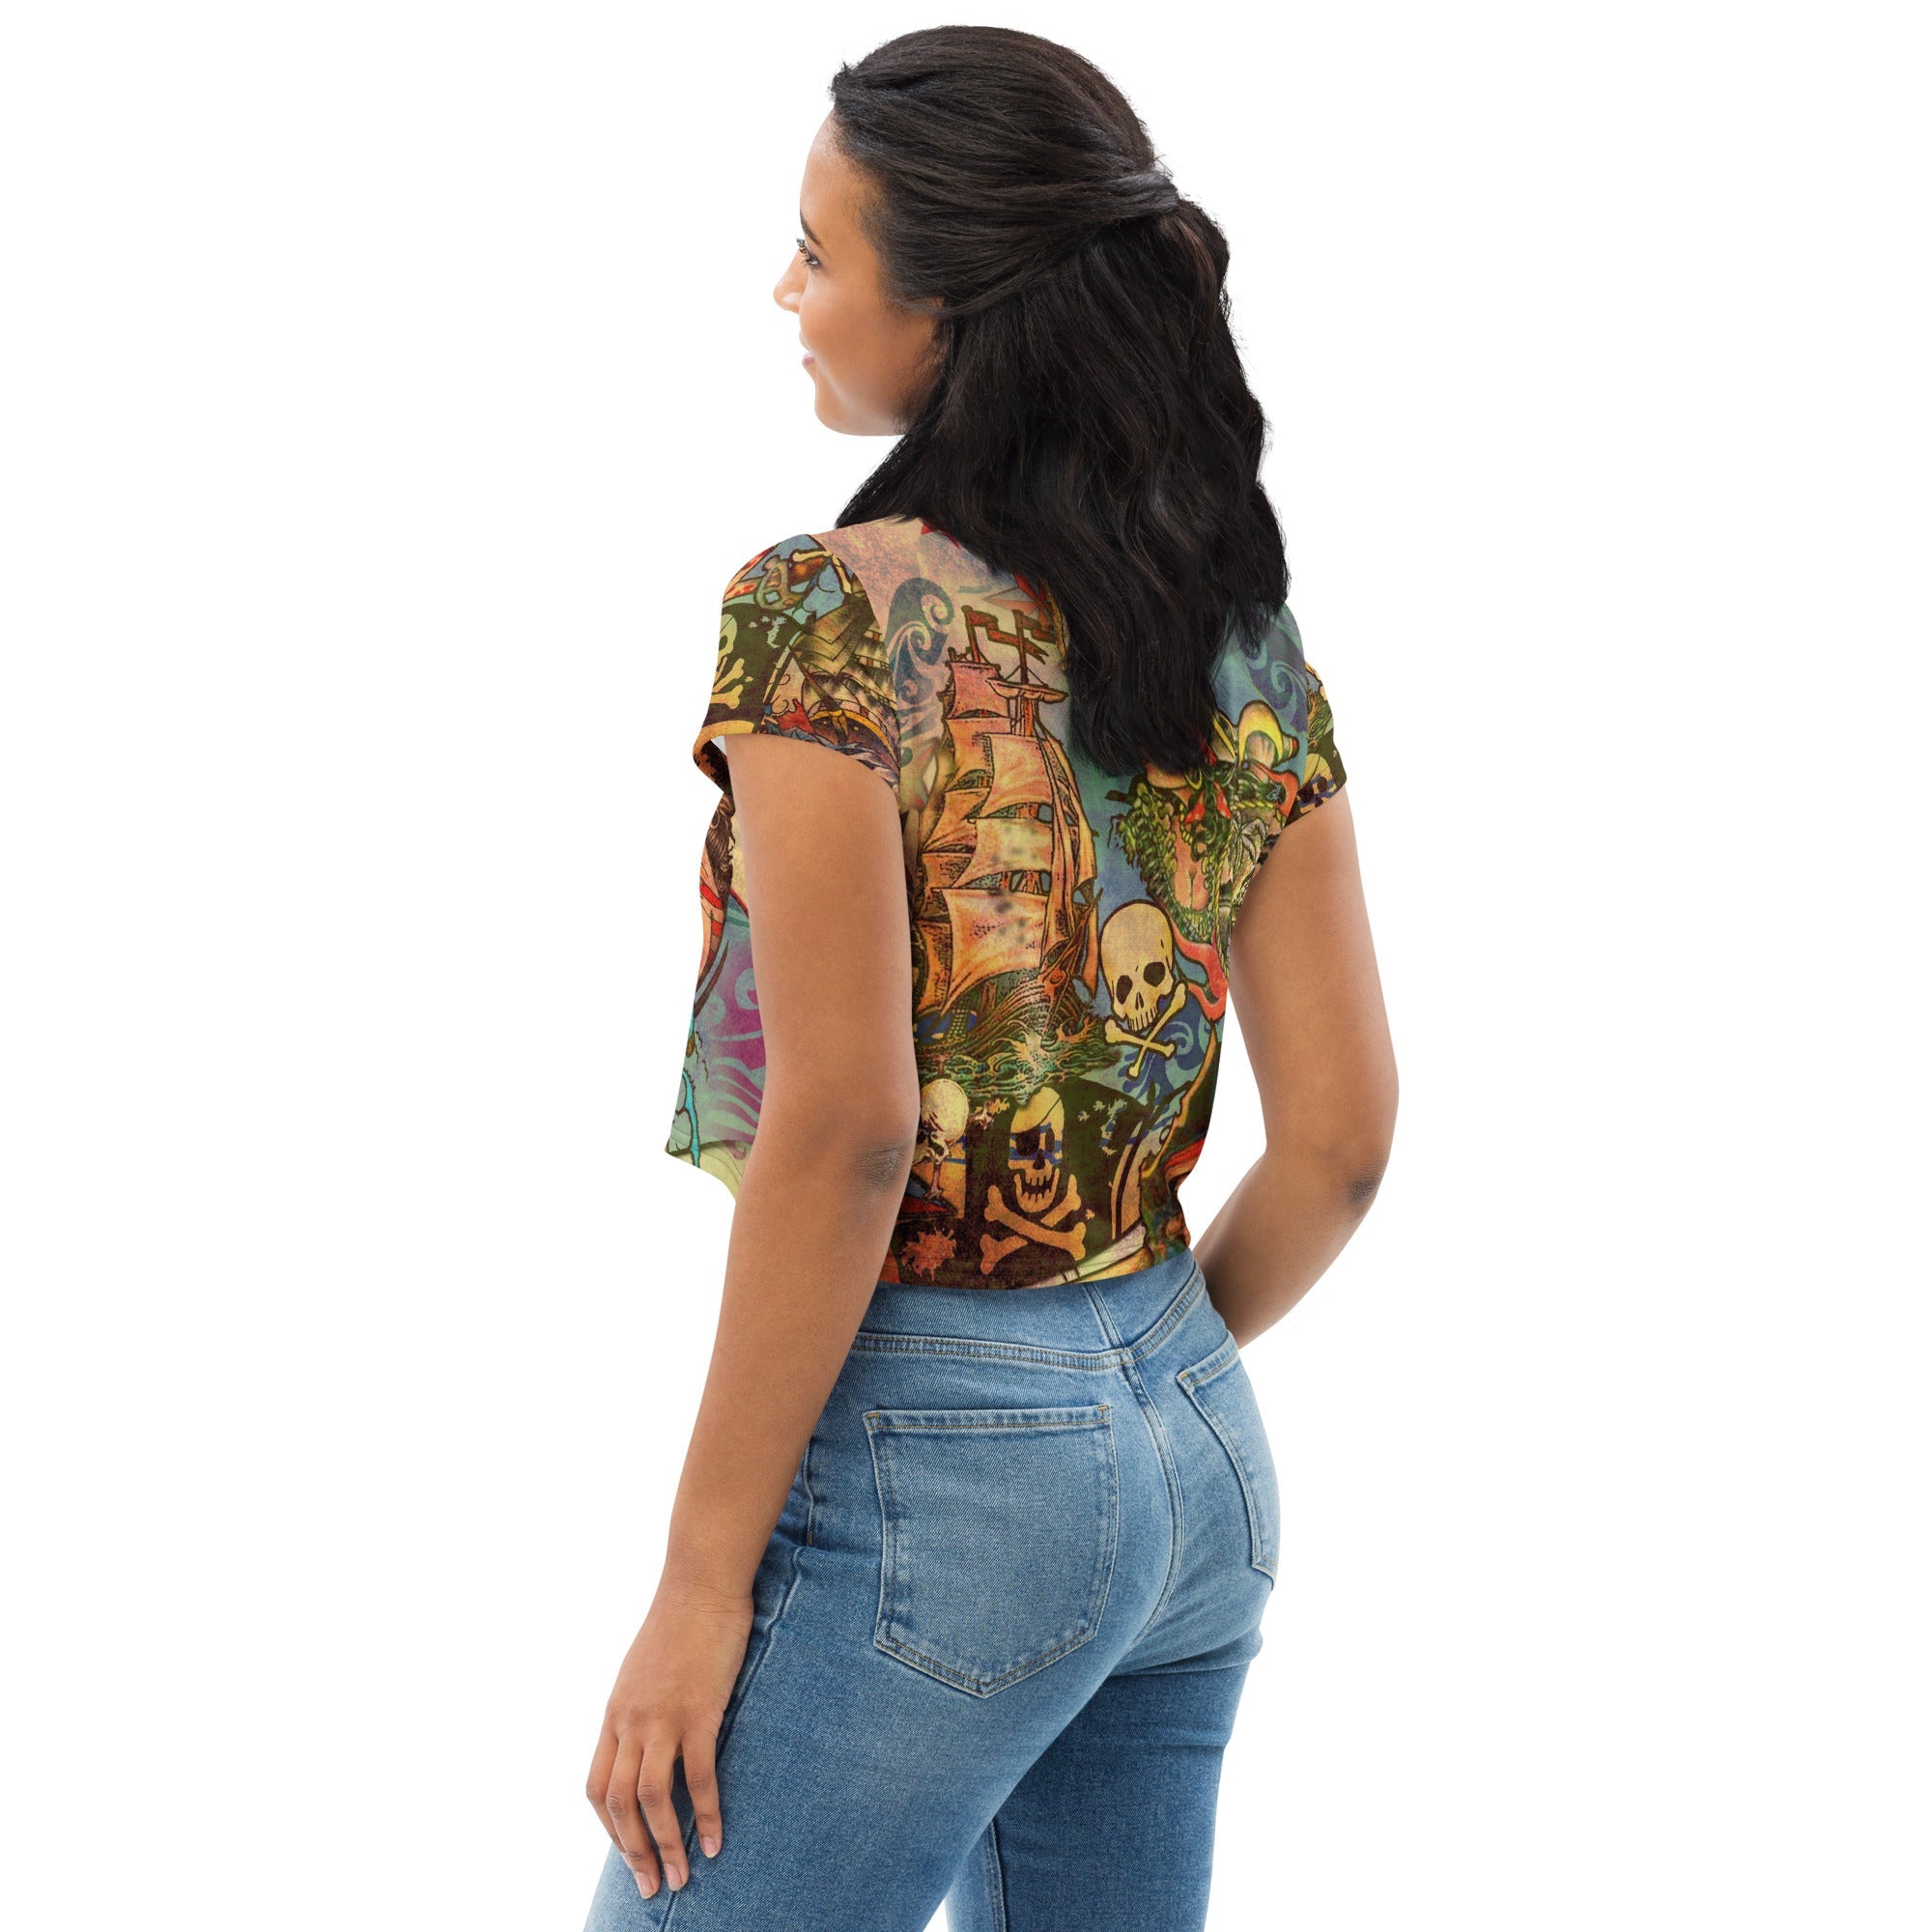 "THE PIRATE TATTOO CROP TOP" for women